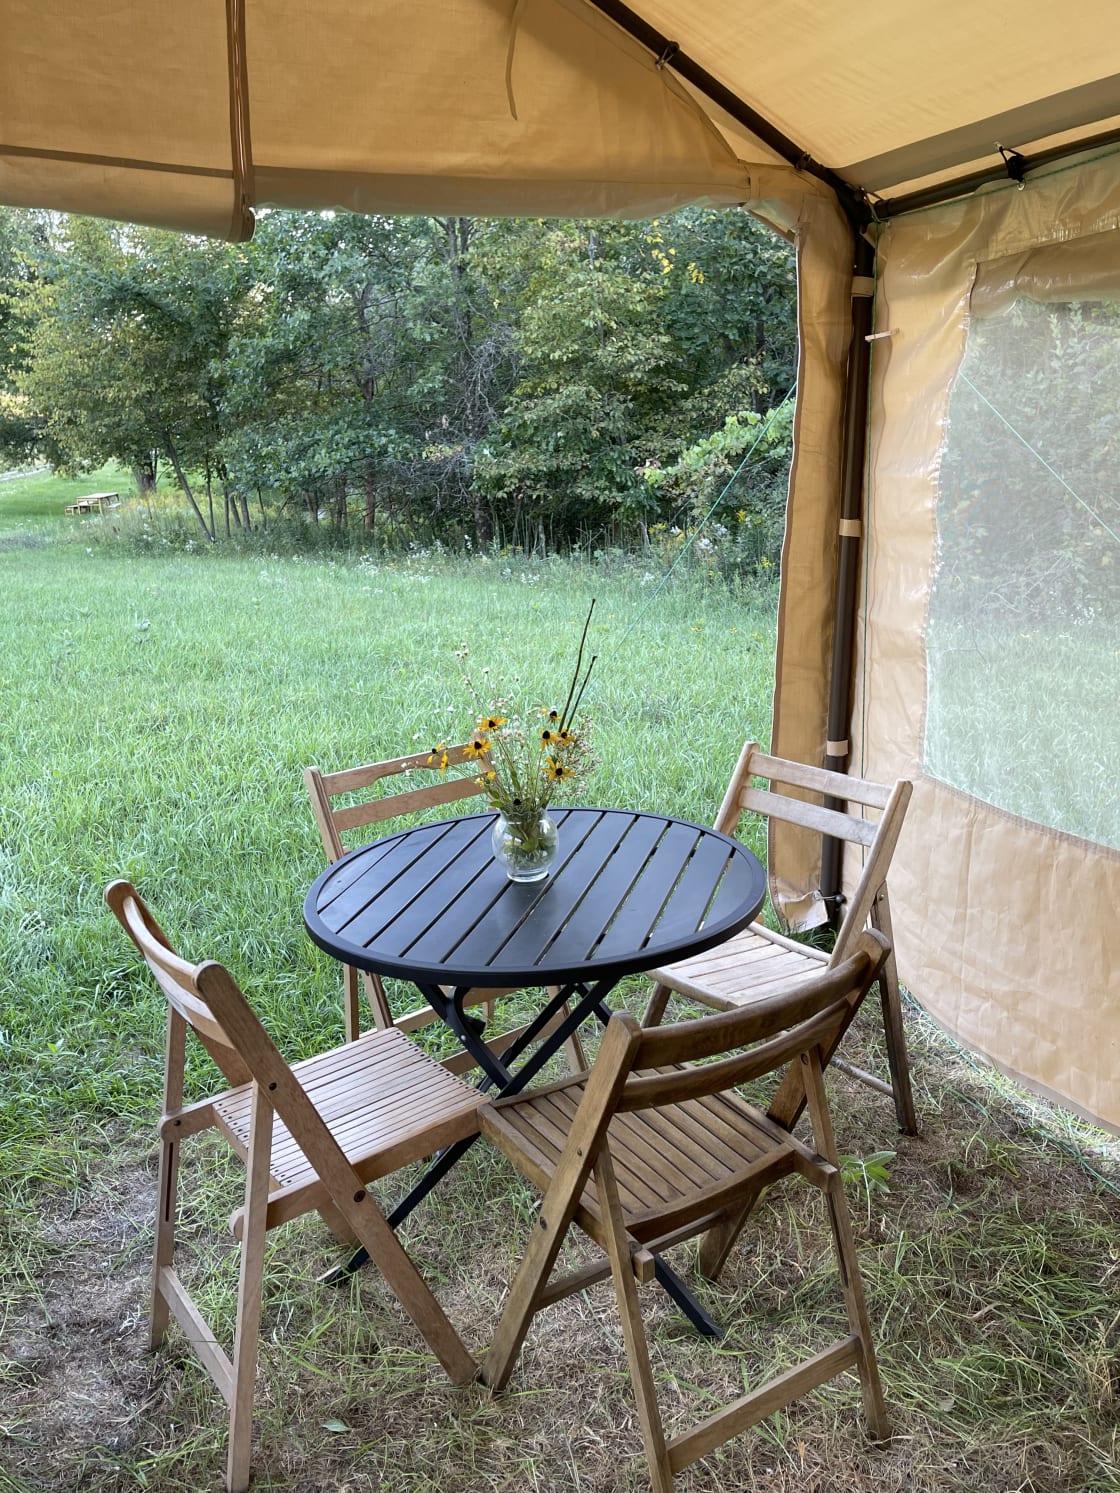 For sheltered dining, we have this in the outdoor kitchen.